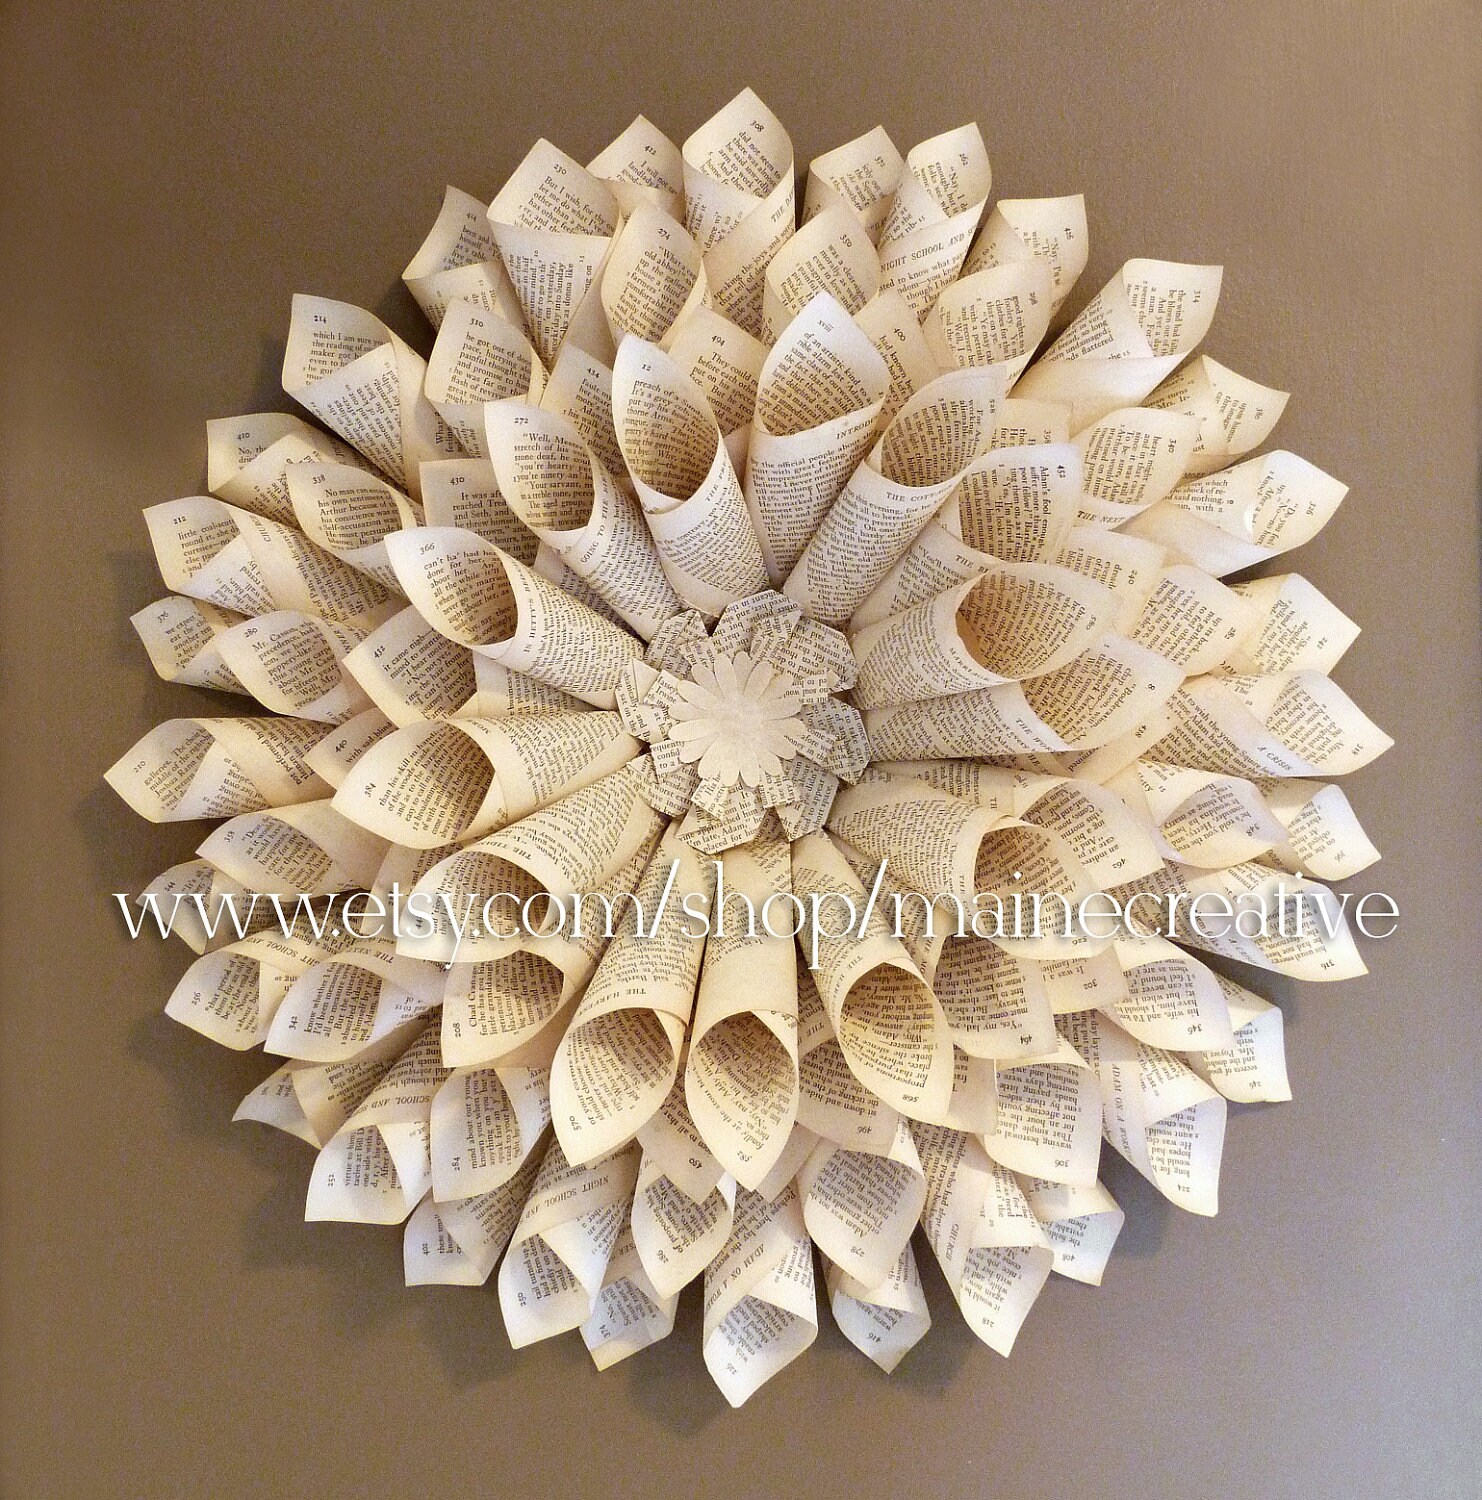 Bookpage wallflower 3 dimensional eco friendly recycled wall